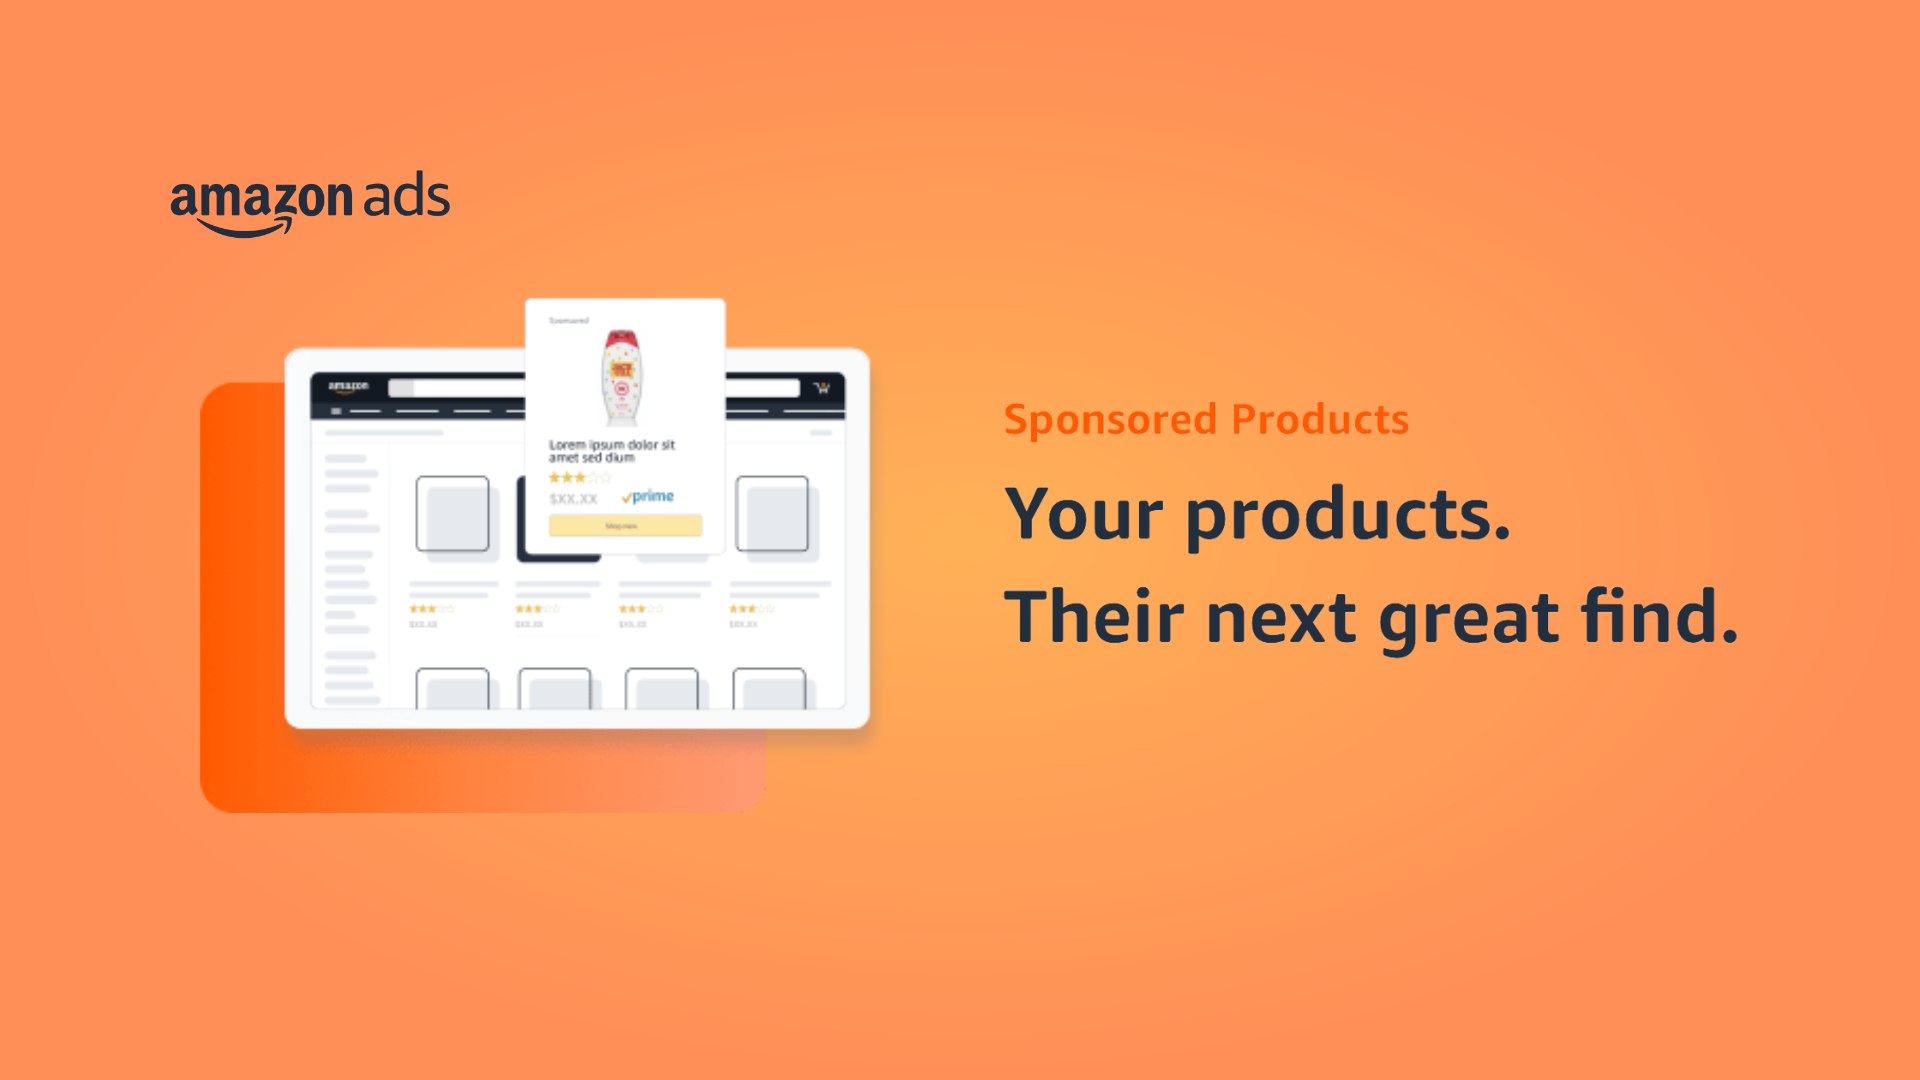 5 Advanced Sponsored Product Ads Tactics That Will Set You Apart From the Pack